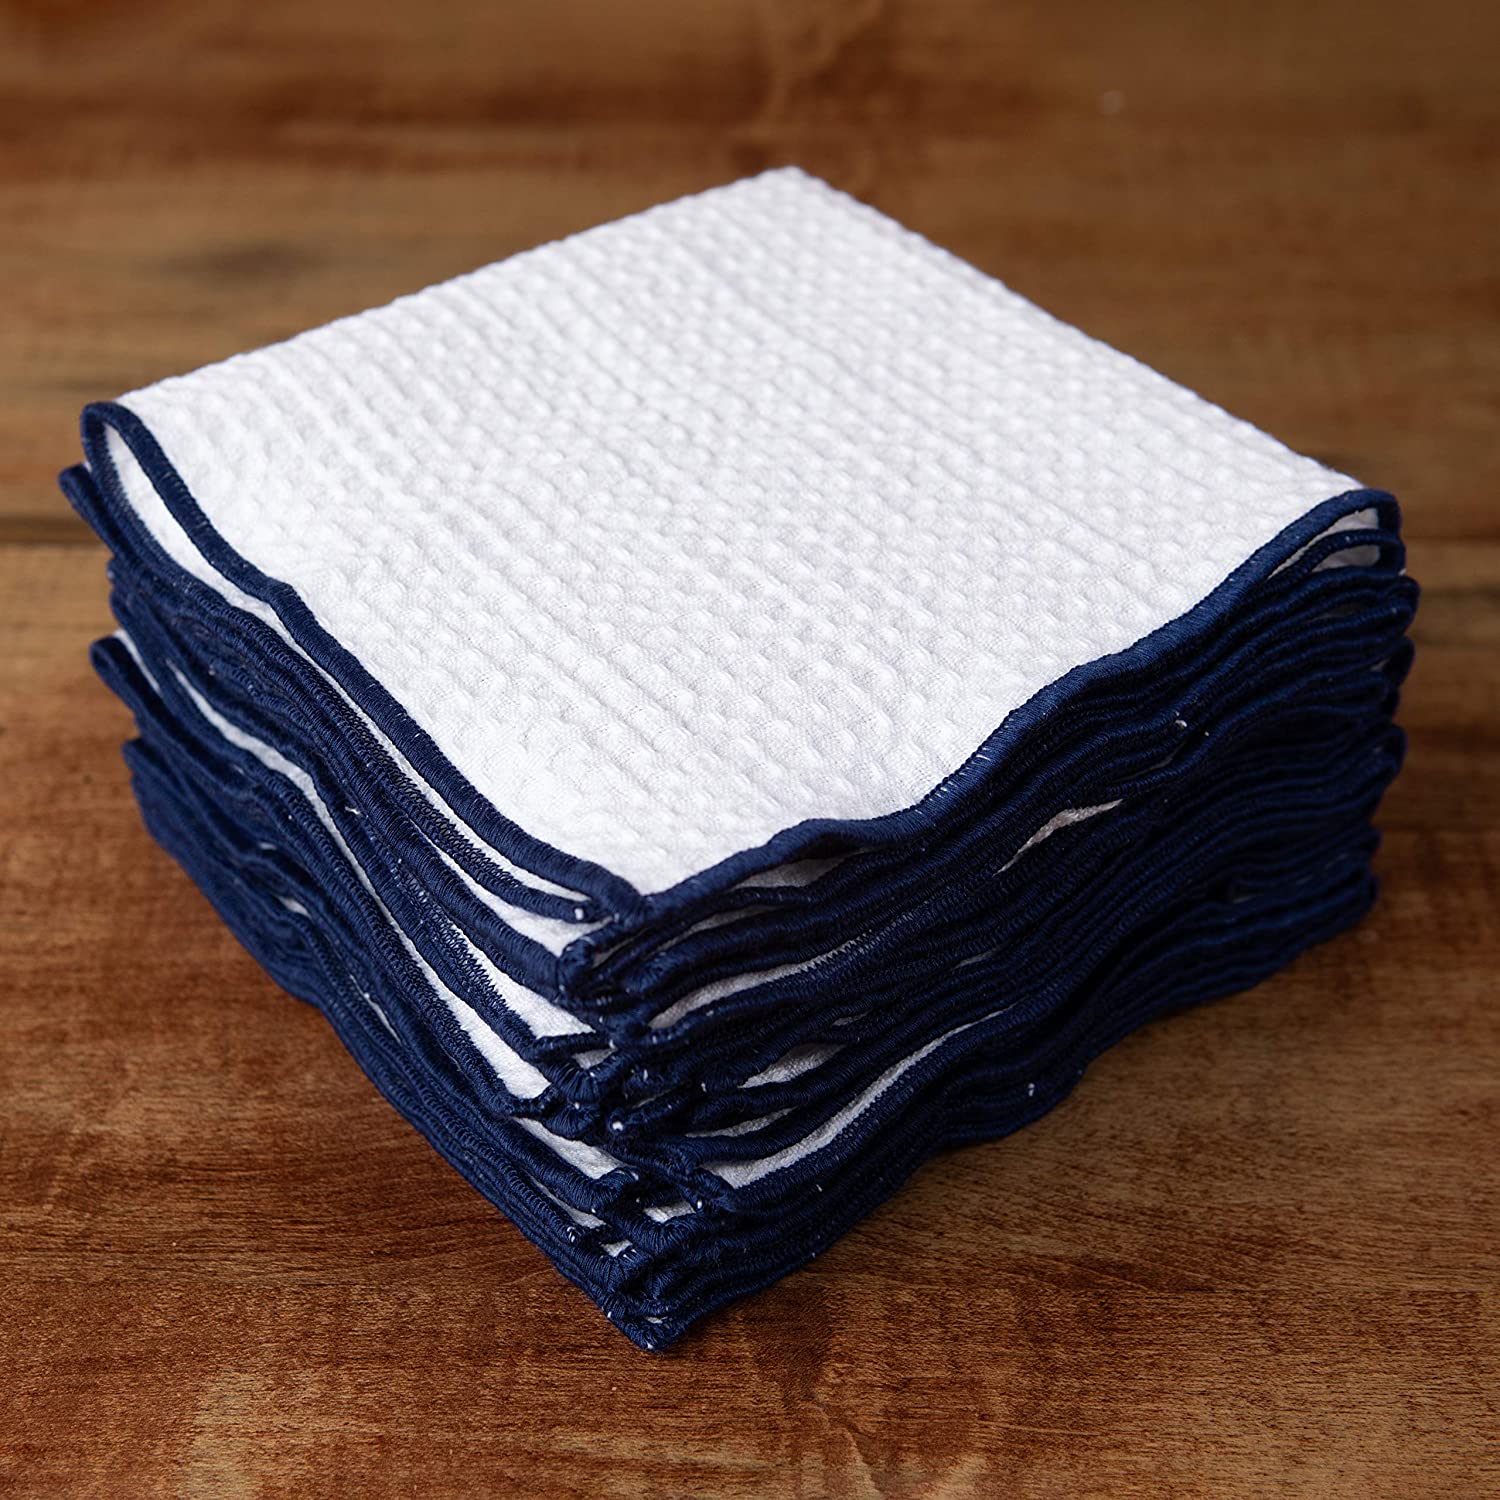 joybest Cotton Kitchen Dish Cloths, 8-Pack Waffle Weave Ultra Soft  Absorbent Dish Towels Washcloths Quick Drying Dish Rags, 12x12 Inches, Navy  Blue